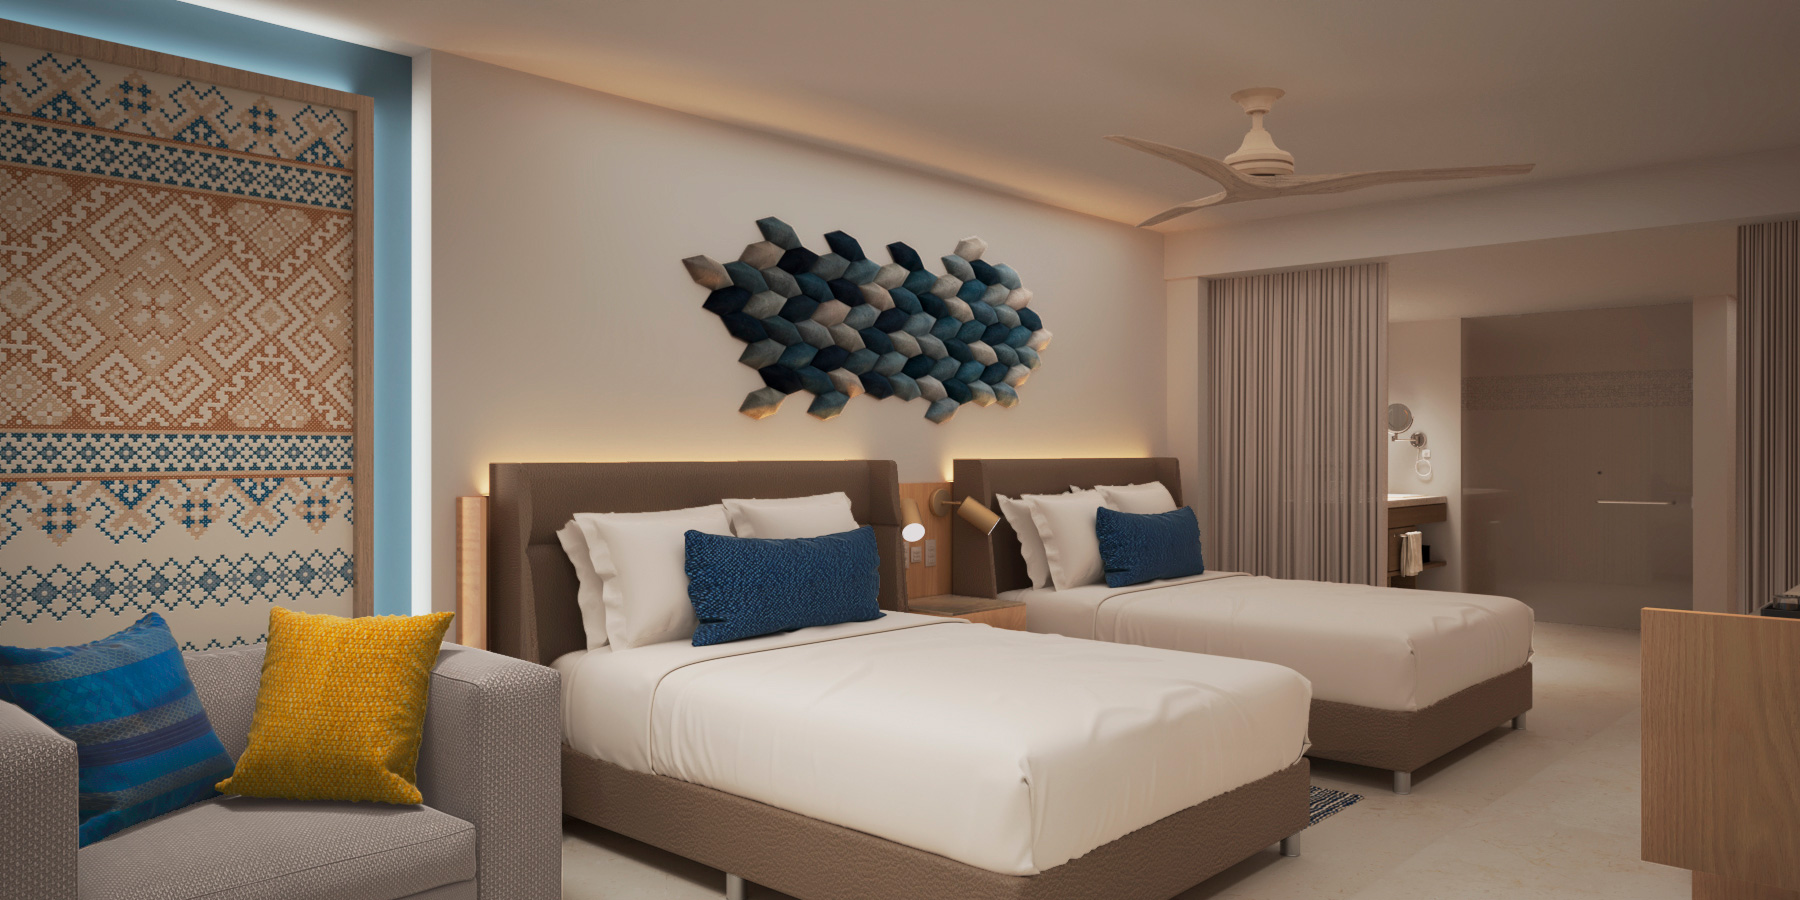 We automate the rooms of the new Royalton in Cancun